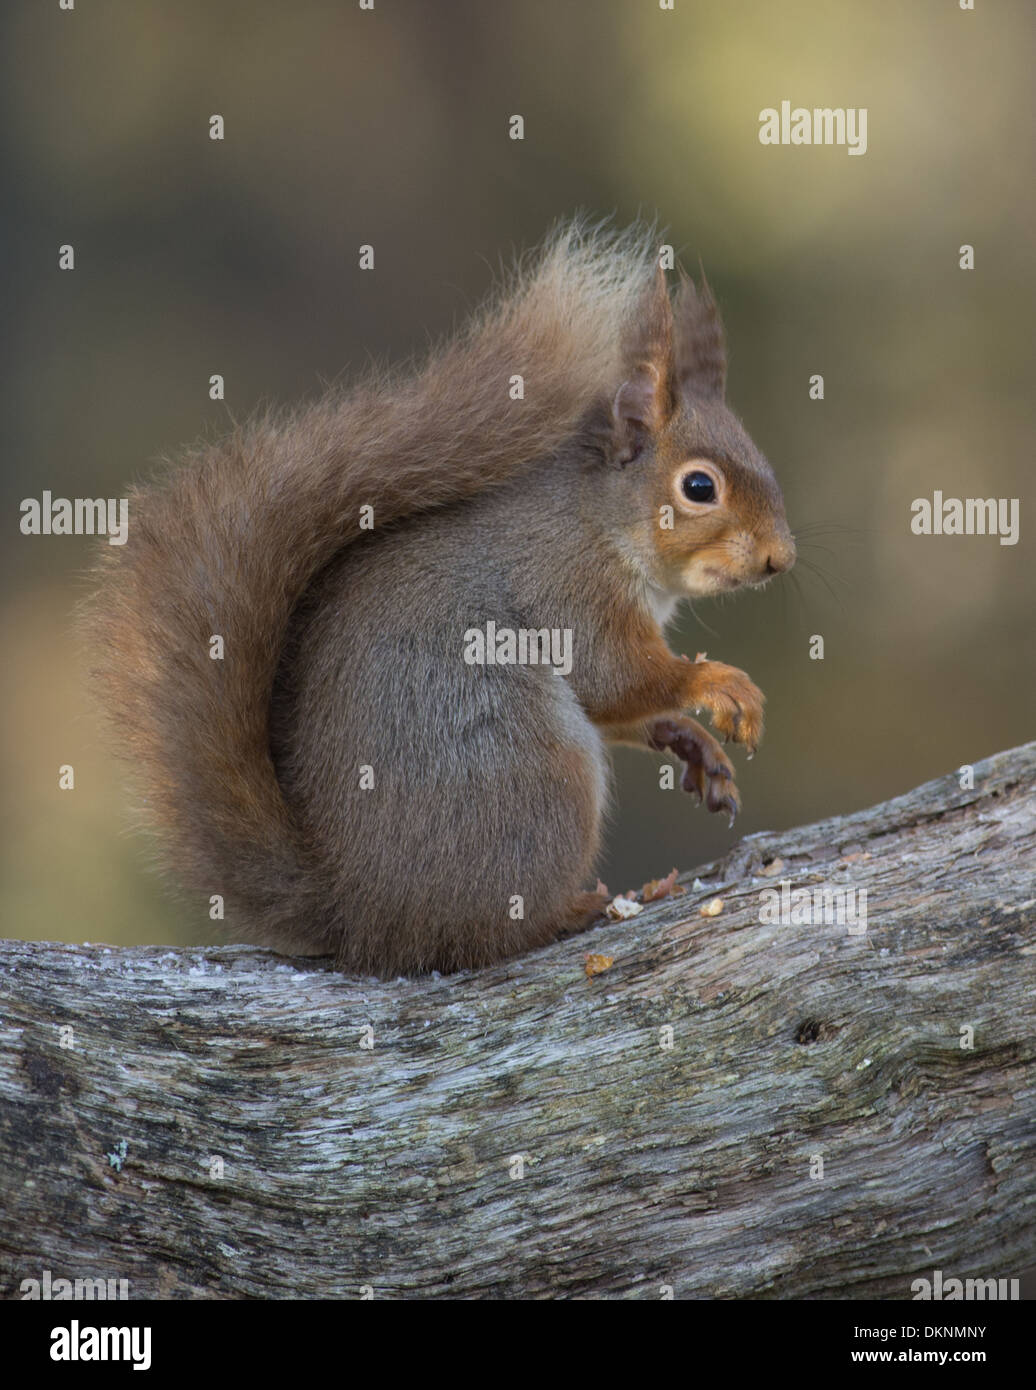 Red squirrel on branch Stock Photo